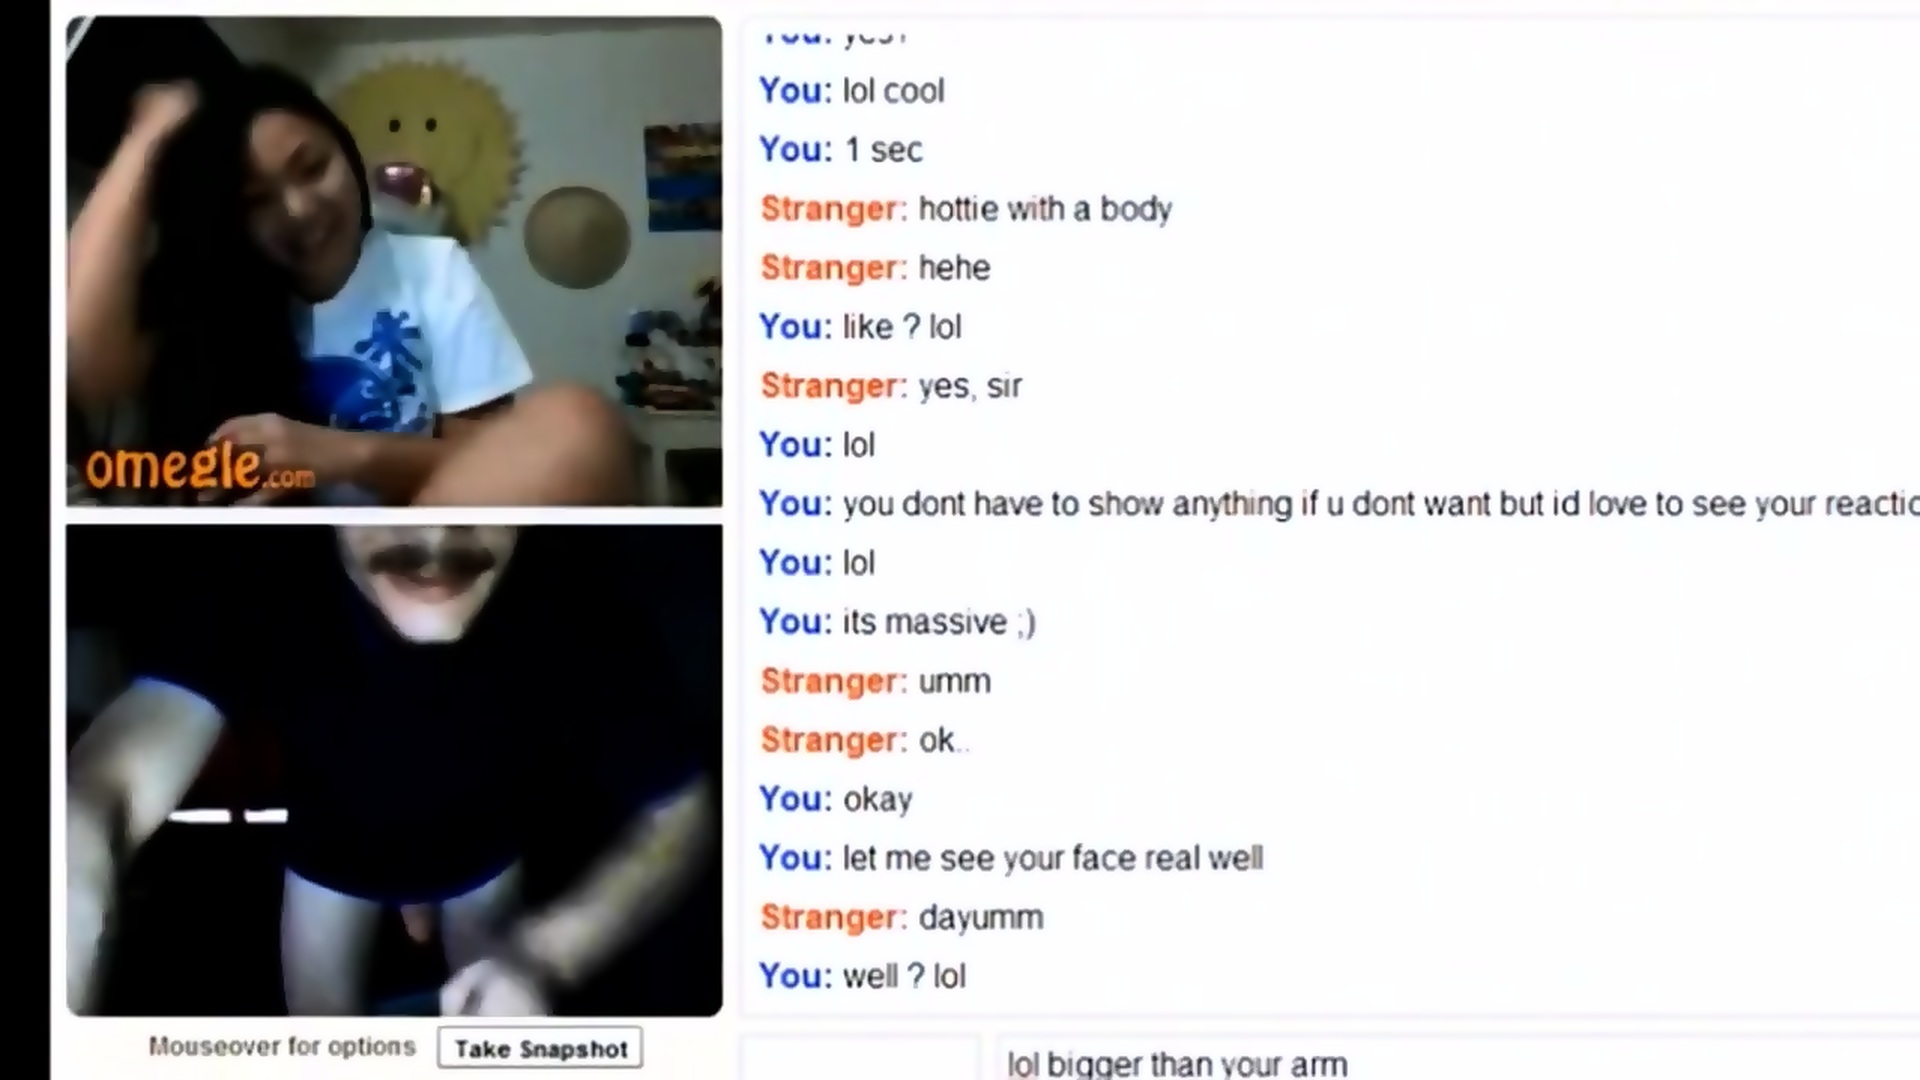 20 omegle feet pics that will drive you wild